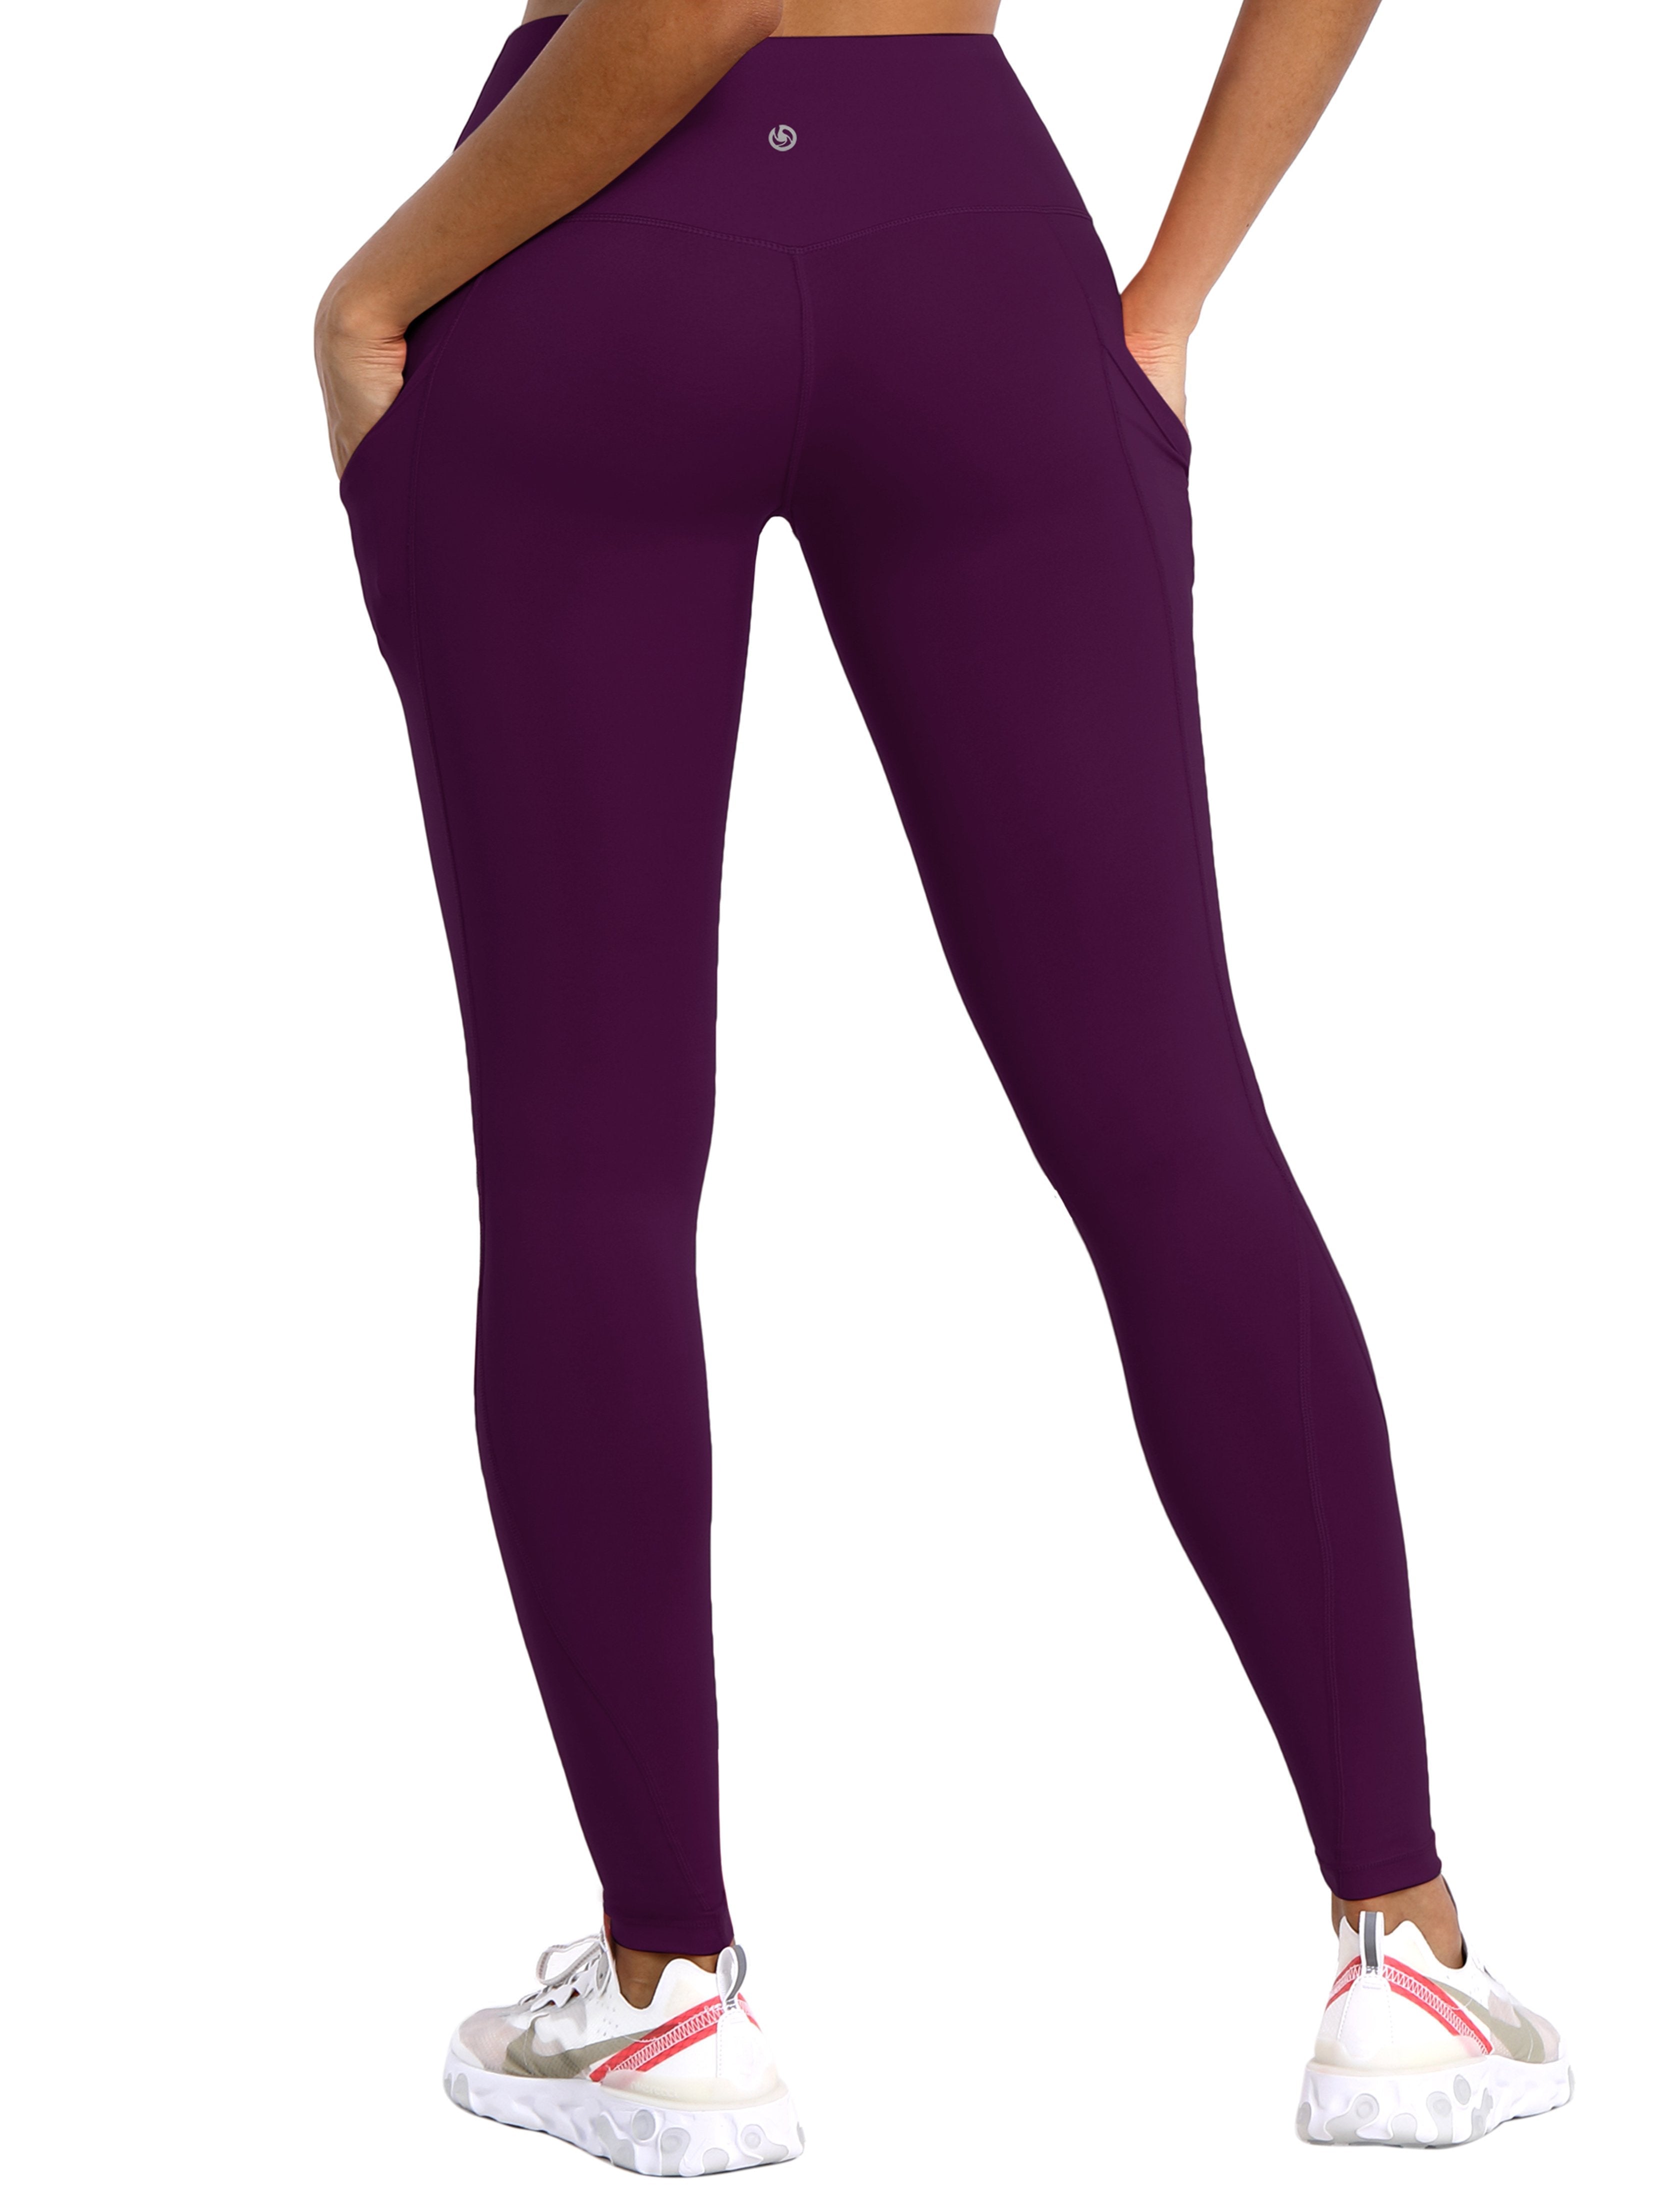 High Waist Side Pockets Running Pants plum 75% Nylon, 25% Spandex Fabric doesn't attract lint easily 4-way stretch No see-through Moisture-wicking Tummy control Inner pocket